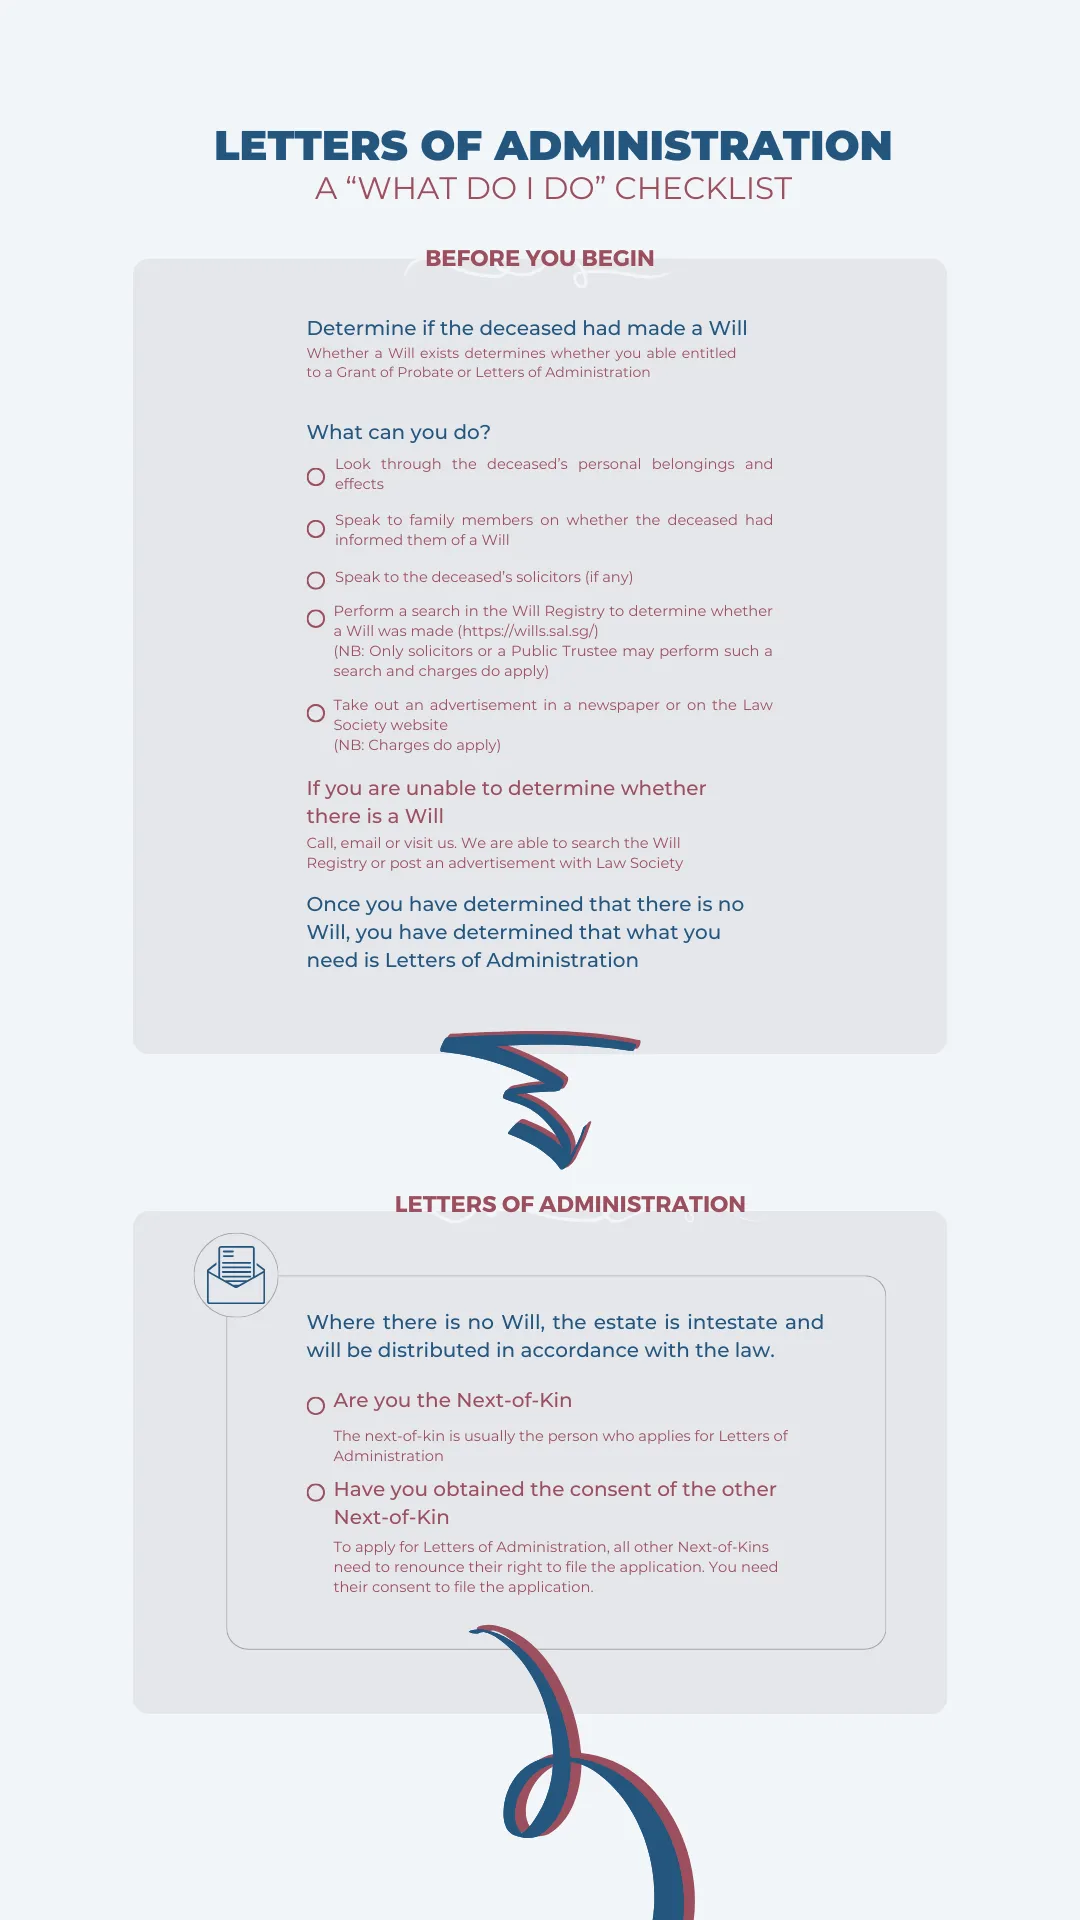 Download our Letters of Administration - A “What Do I Do” Checklist now!